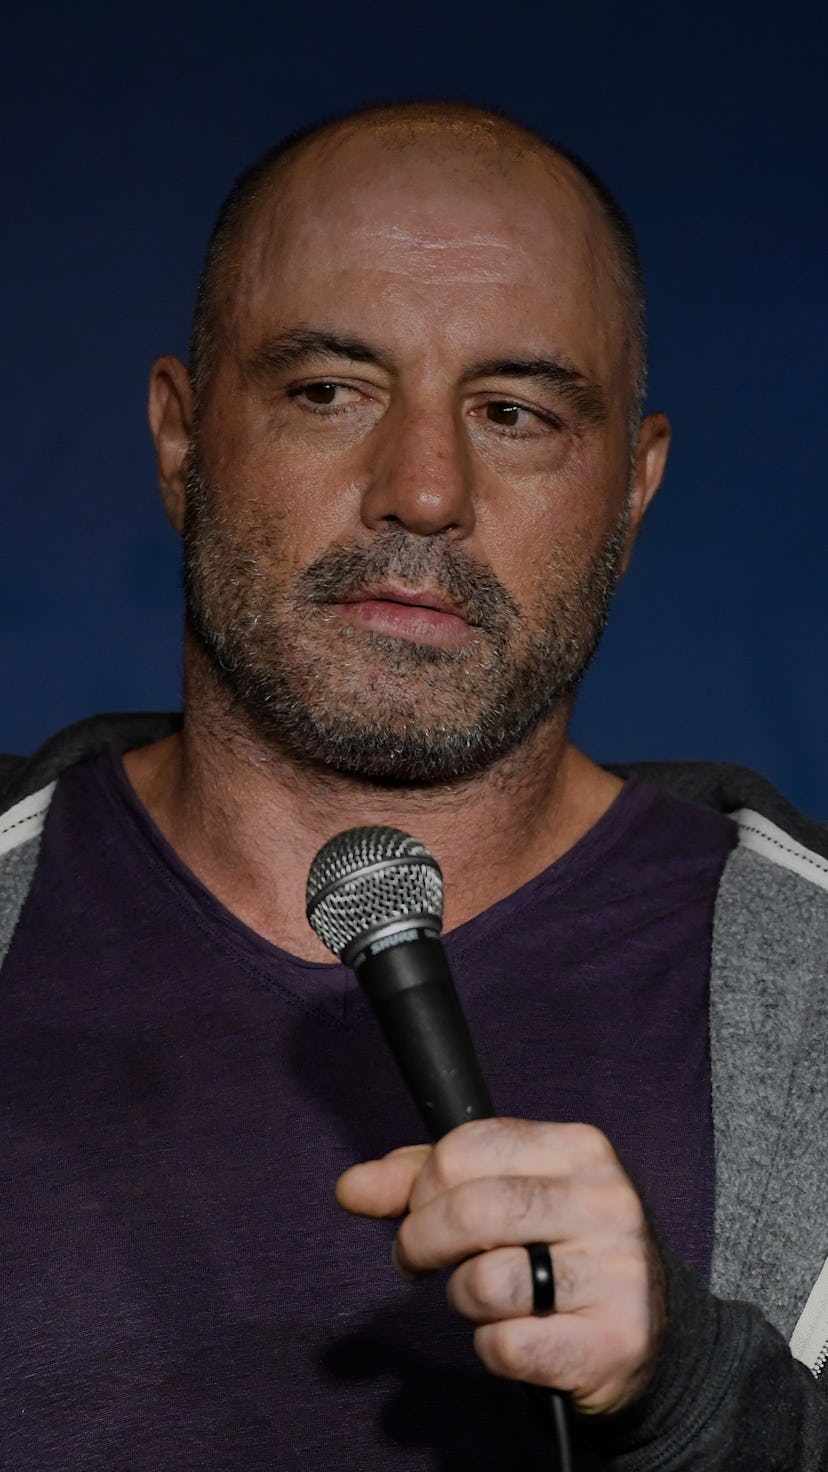 PASADENA, CALIFORNIA - AUGUST 07: Comedian Joe Rogan performs during his appearance at The Ice House...